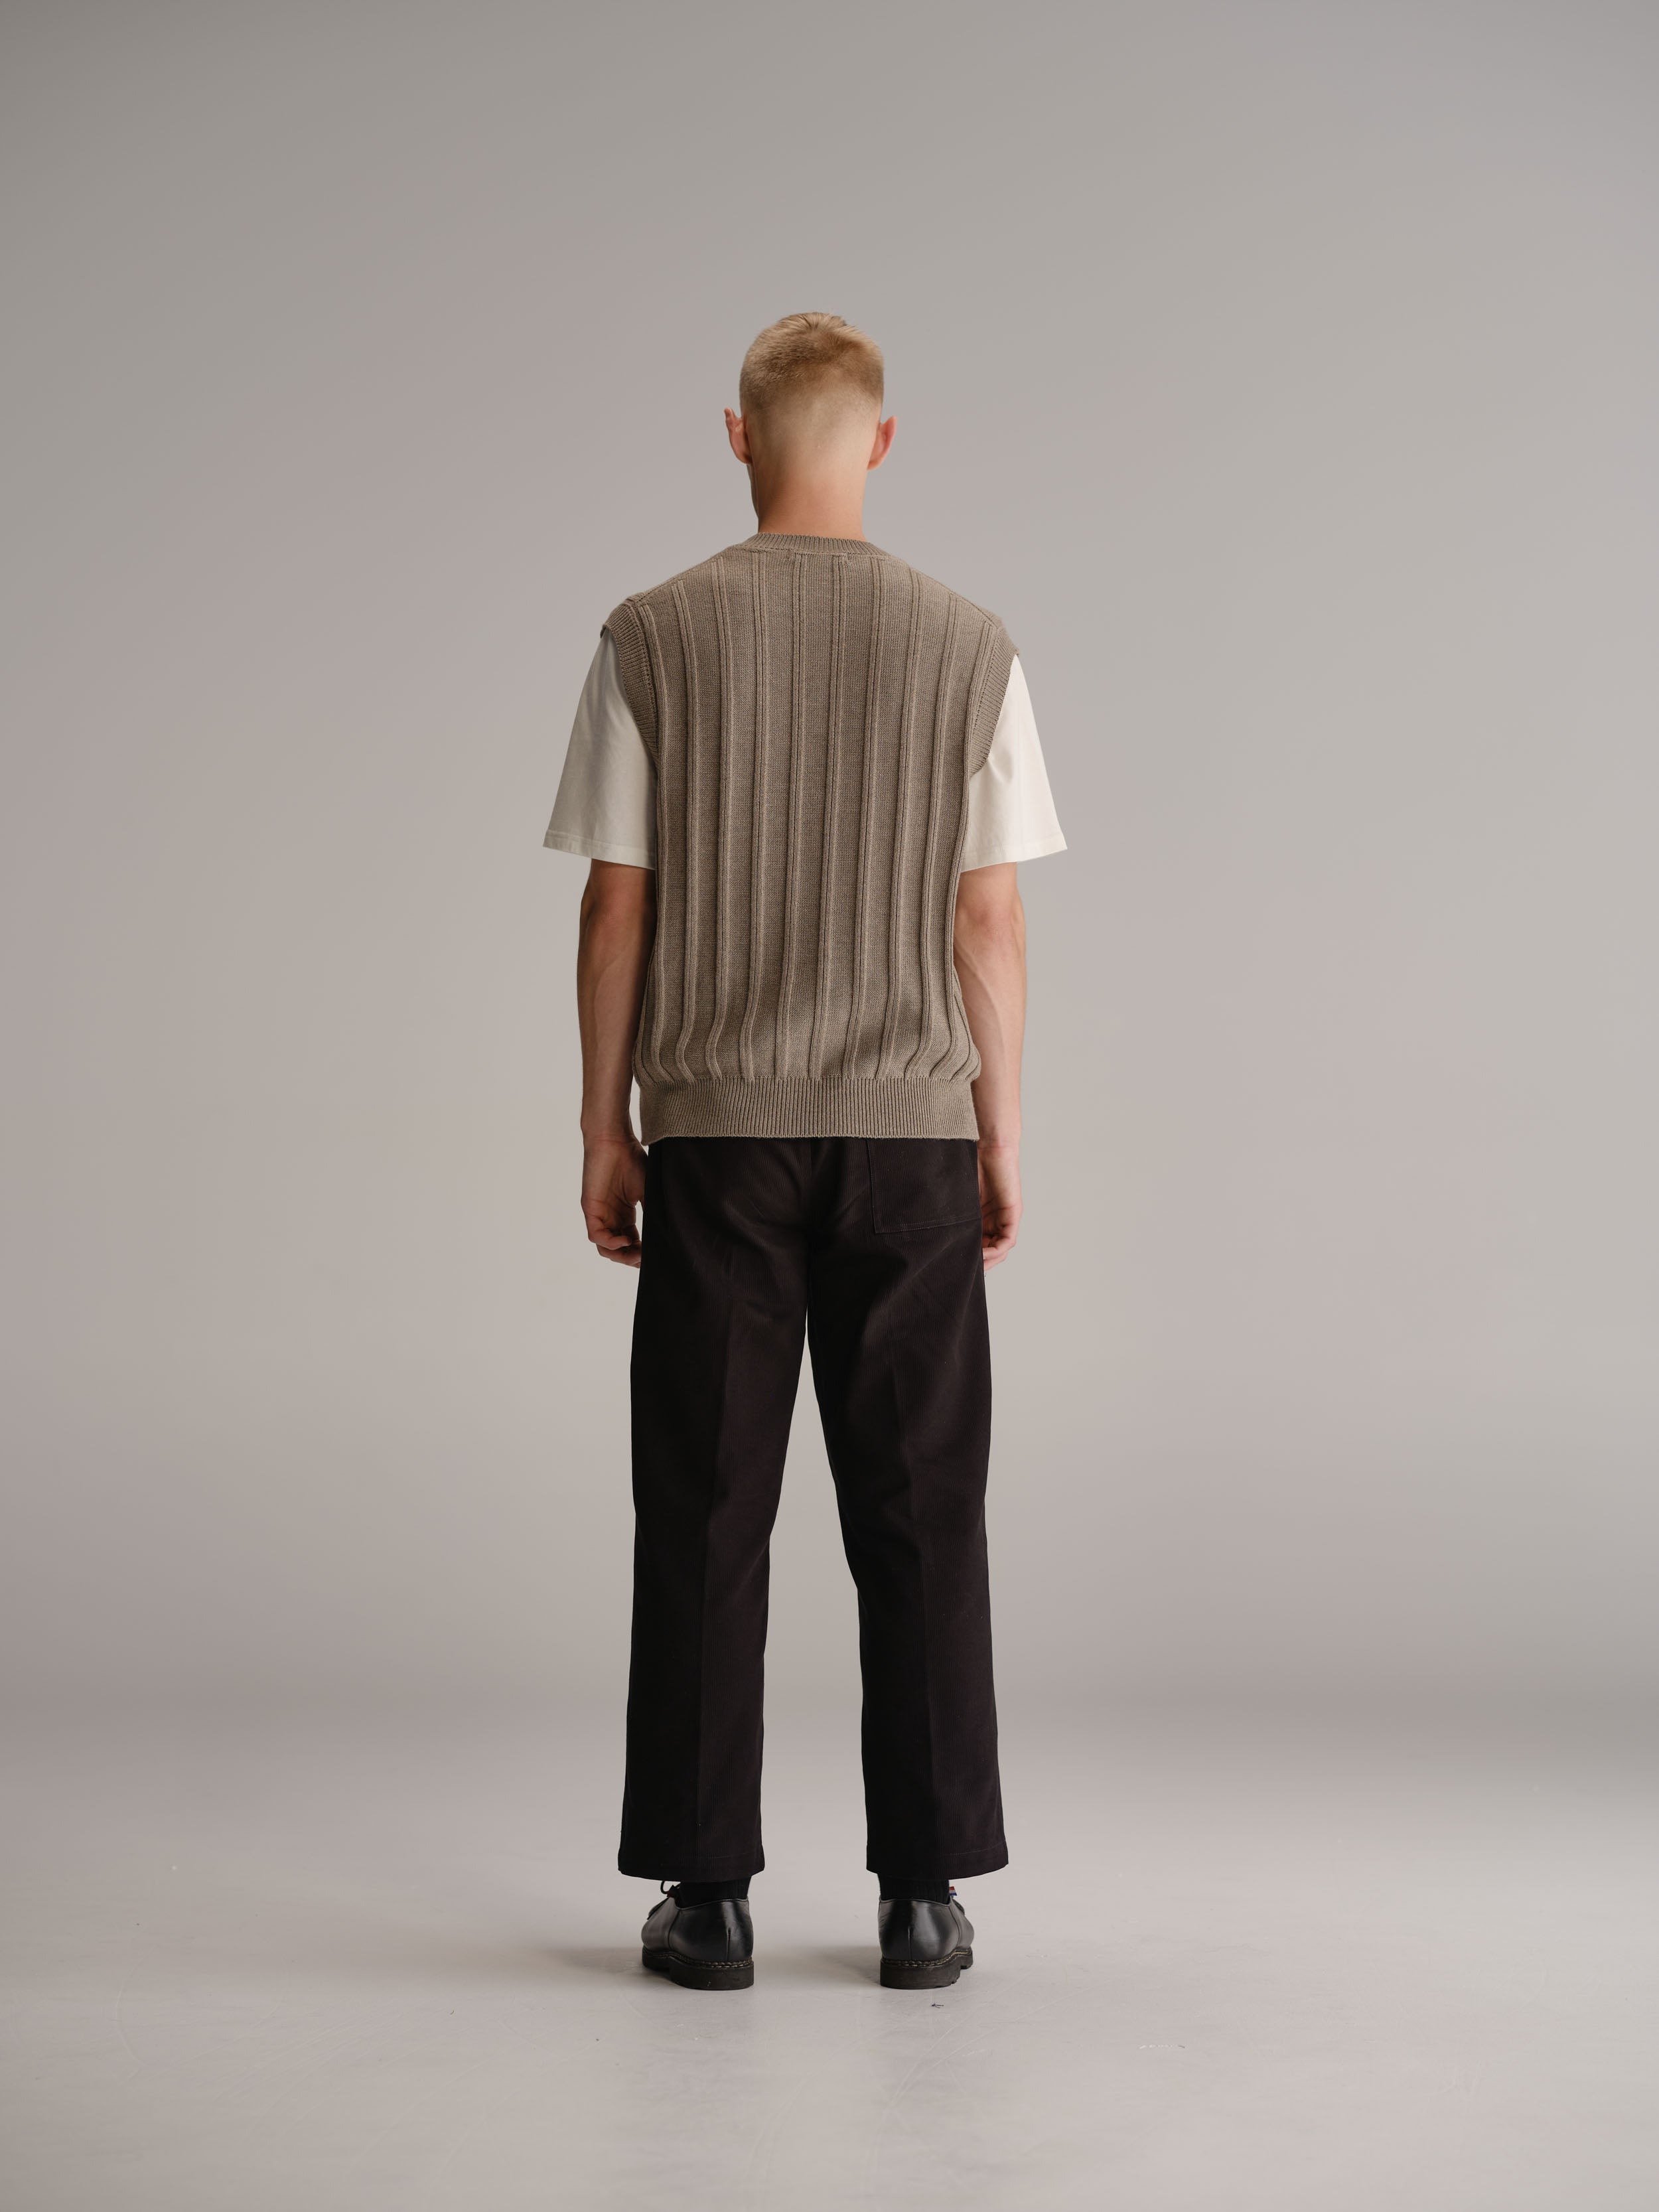 Back view of man standing in white studio wearing wheat vest over a white t-shirt, black pants and black leather shoes.